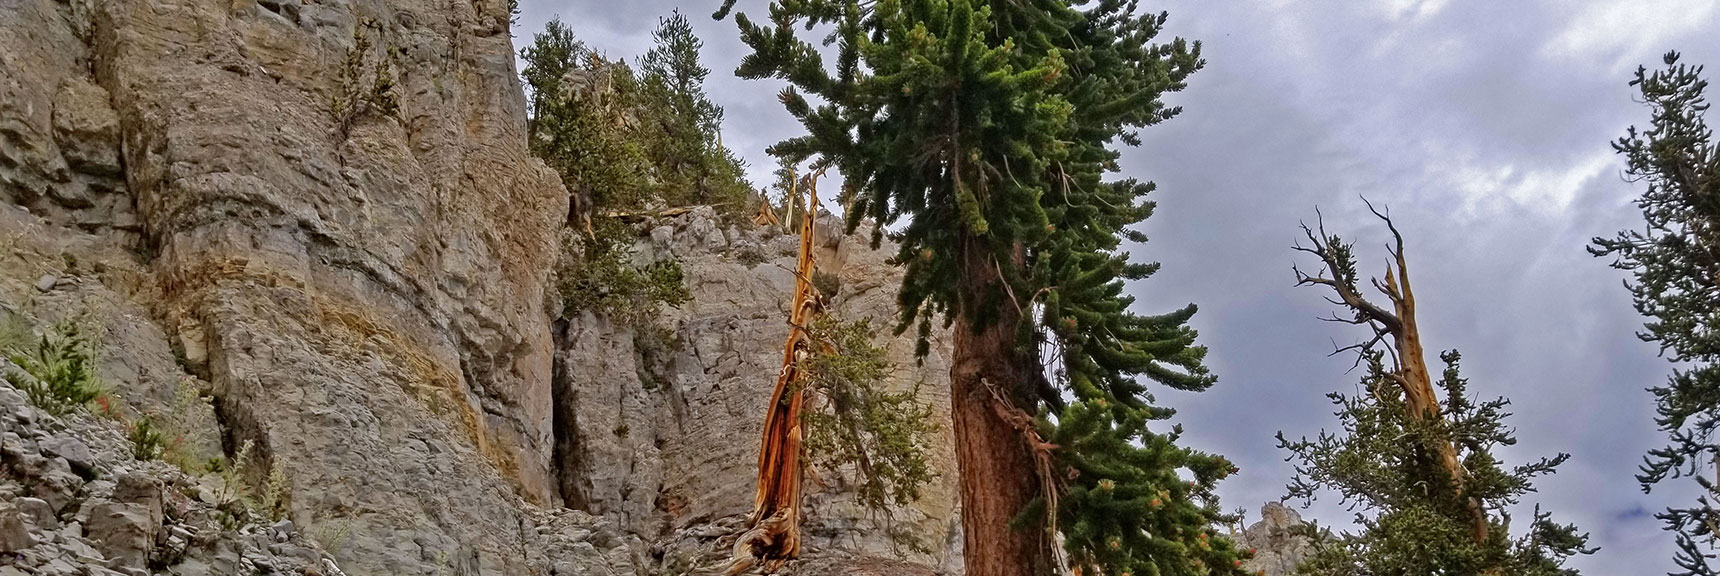 Turn Around Often to See an Entirely Different View of Majestic Trees and Cliffs | Lee and Charleston Peaks via Lee Canyon Mid Ridge | Mt Charleston Wilderness | Spring Mountains, Nevada